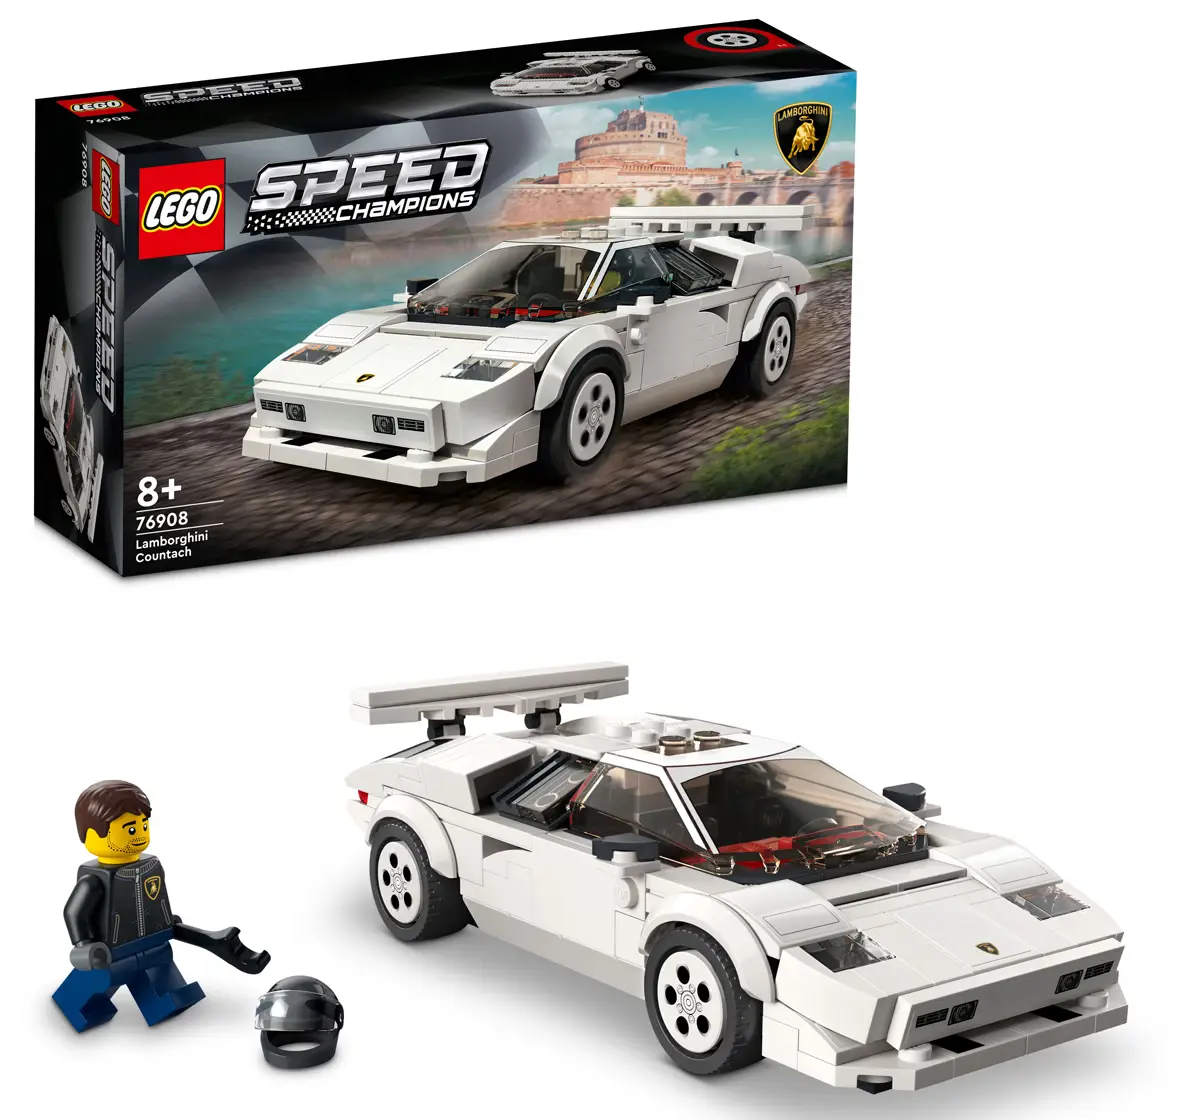 Speed Champions Lamborghini Countach Building Kit by Lego for Kids Aged 8 Years +, Includes a Driver Minifigure with Helmet and Wrench (262 Pieces)